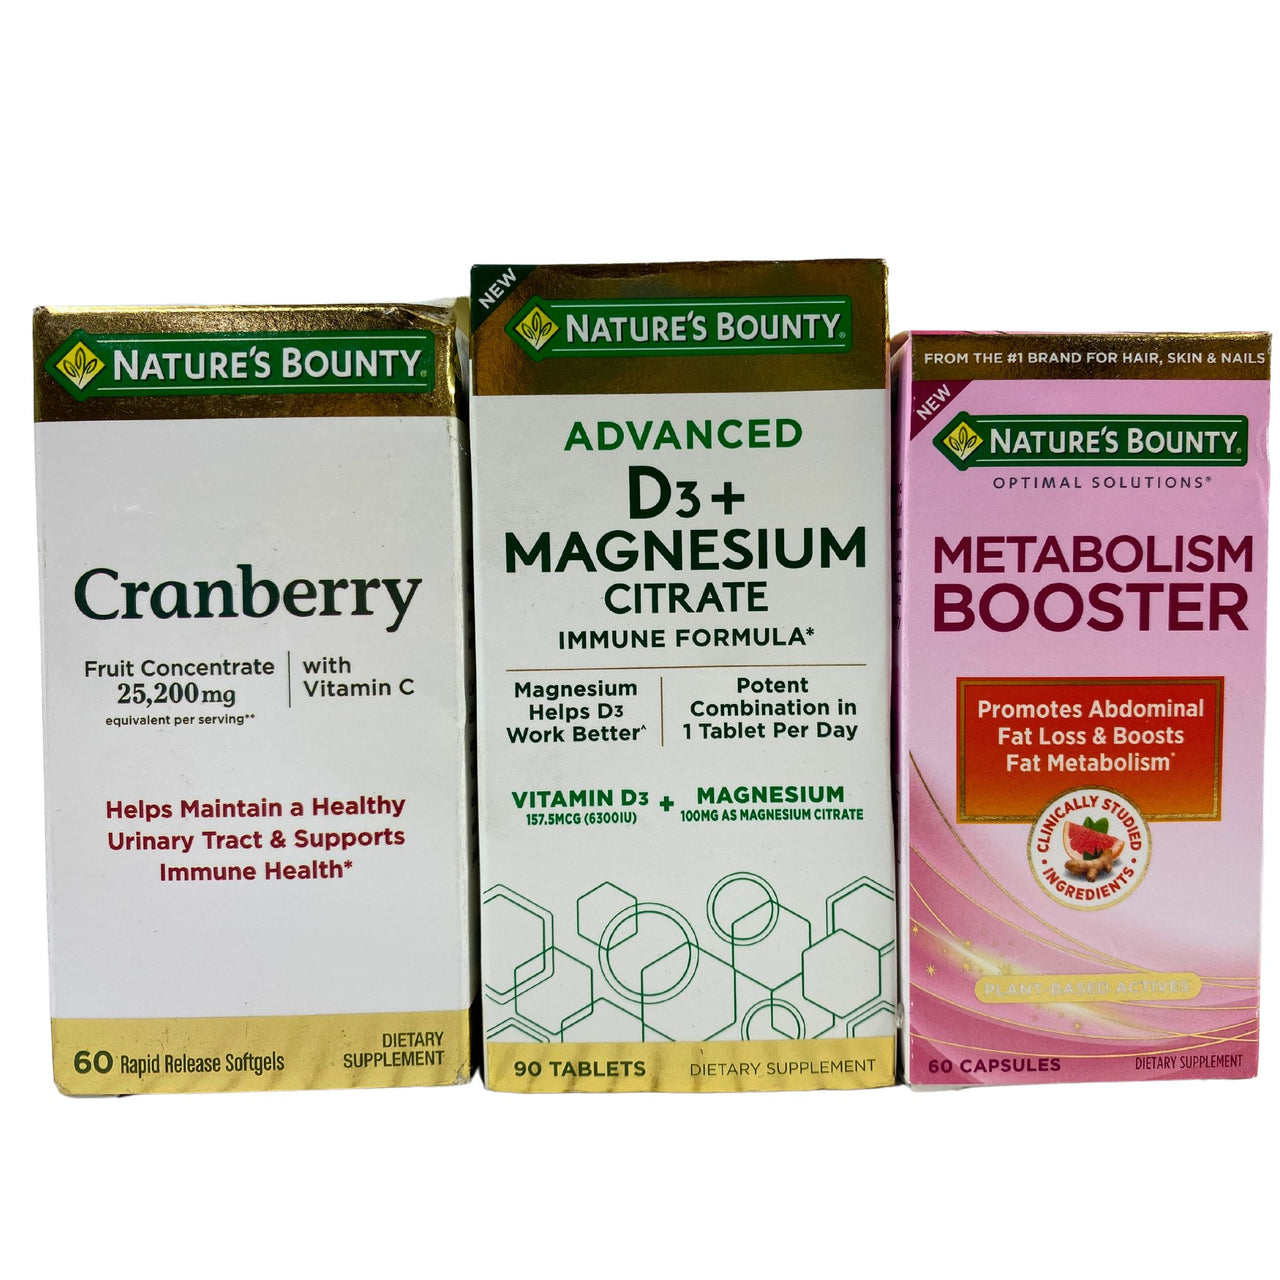 Nature's Bounty Mix - Metabolism Booster, Cranberry & D3+ Magnesium Citrate